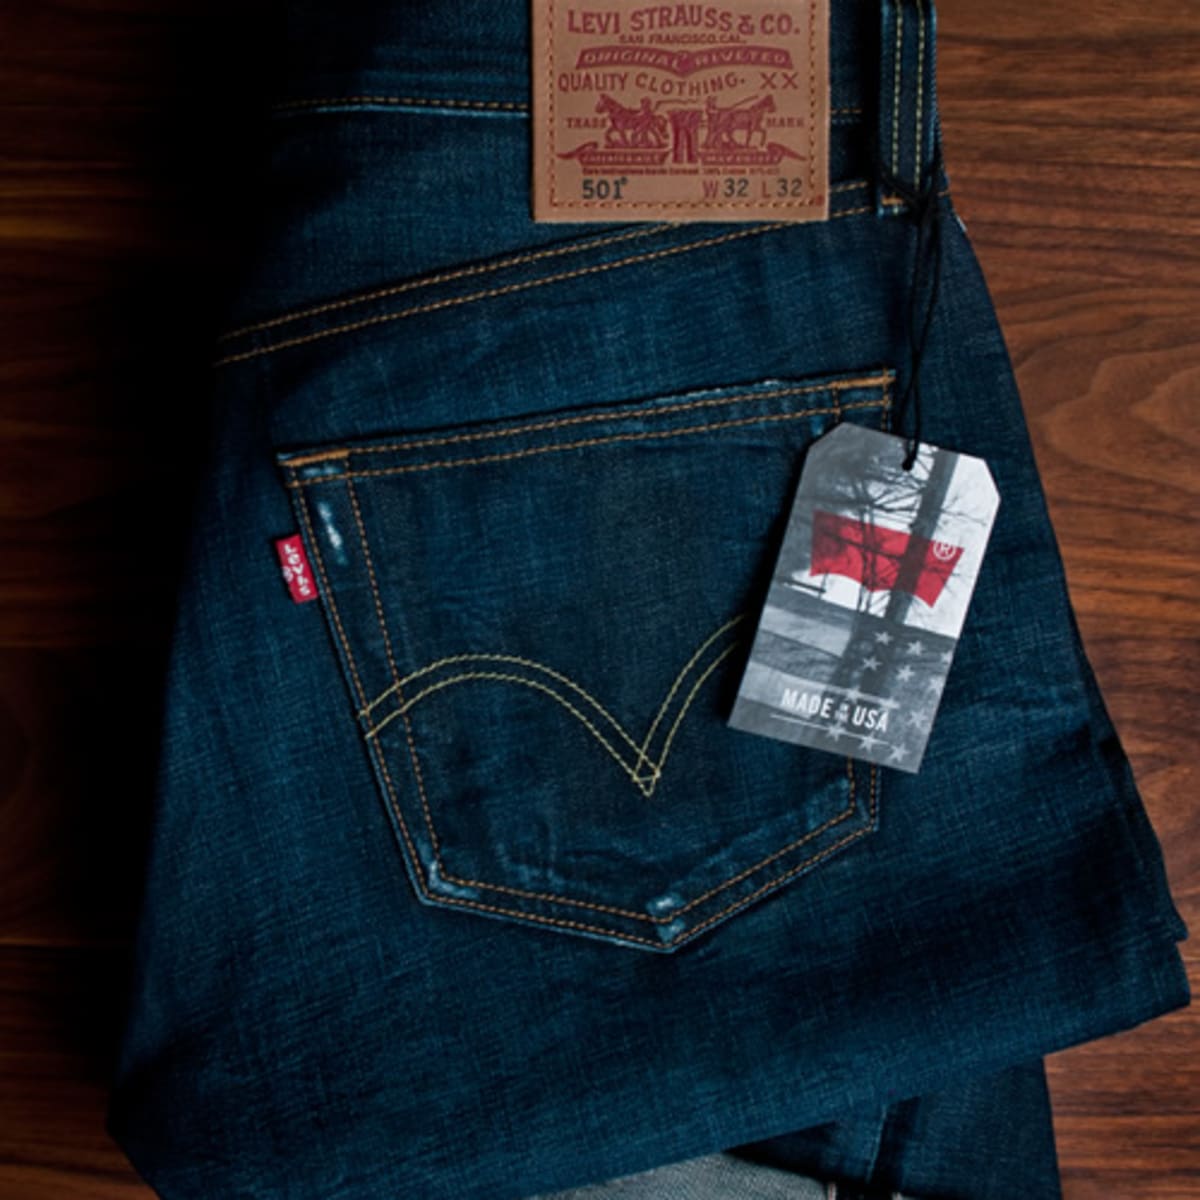 Levi's Waterless Made in USA Collection - Acquire